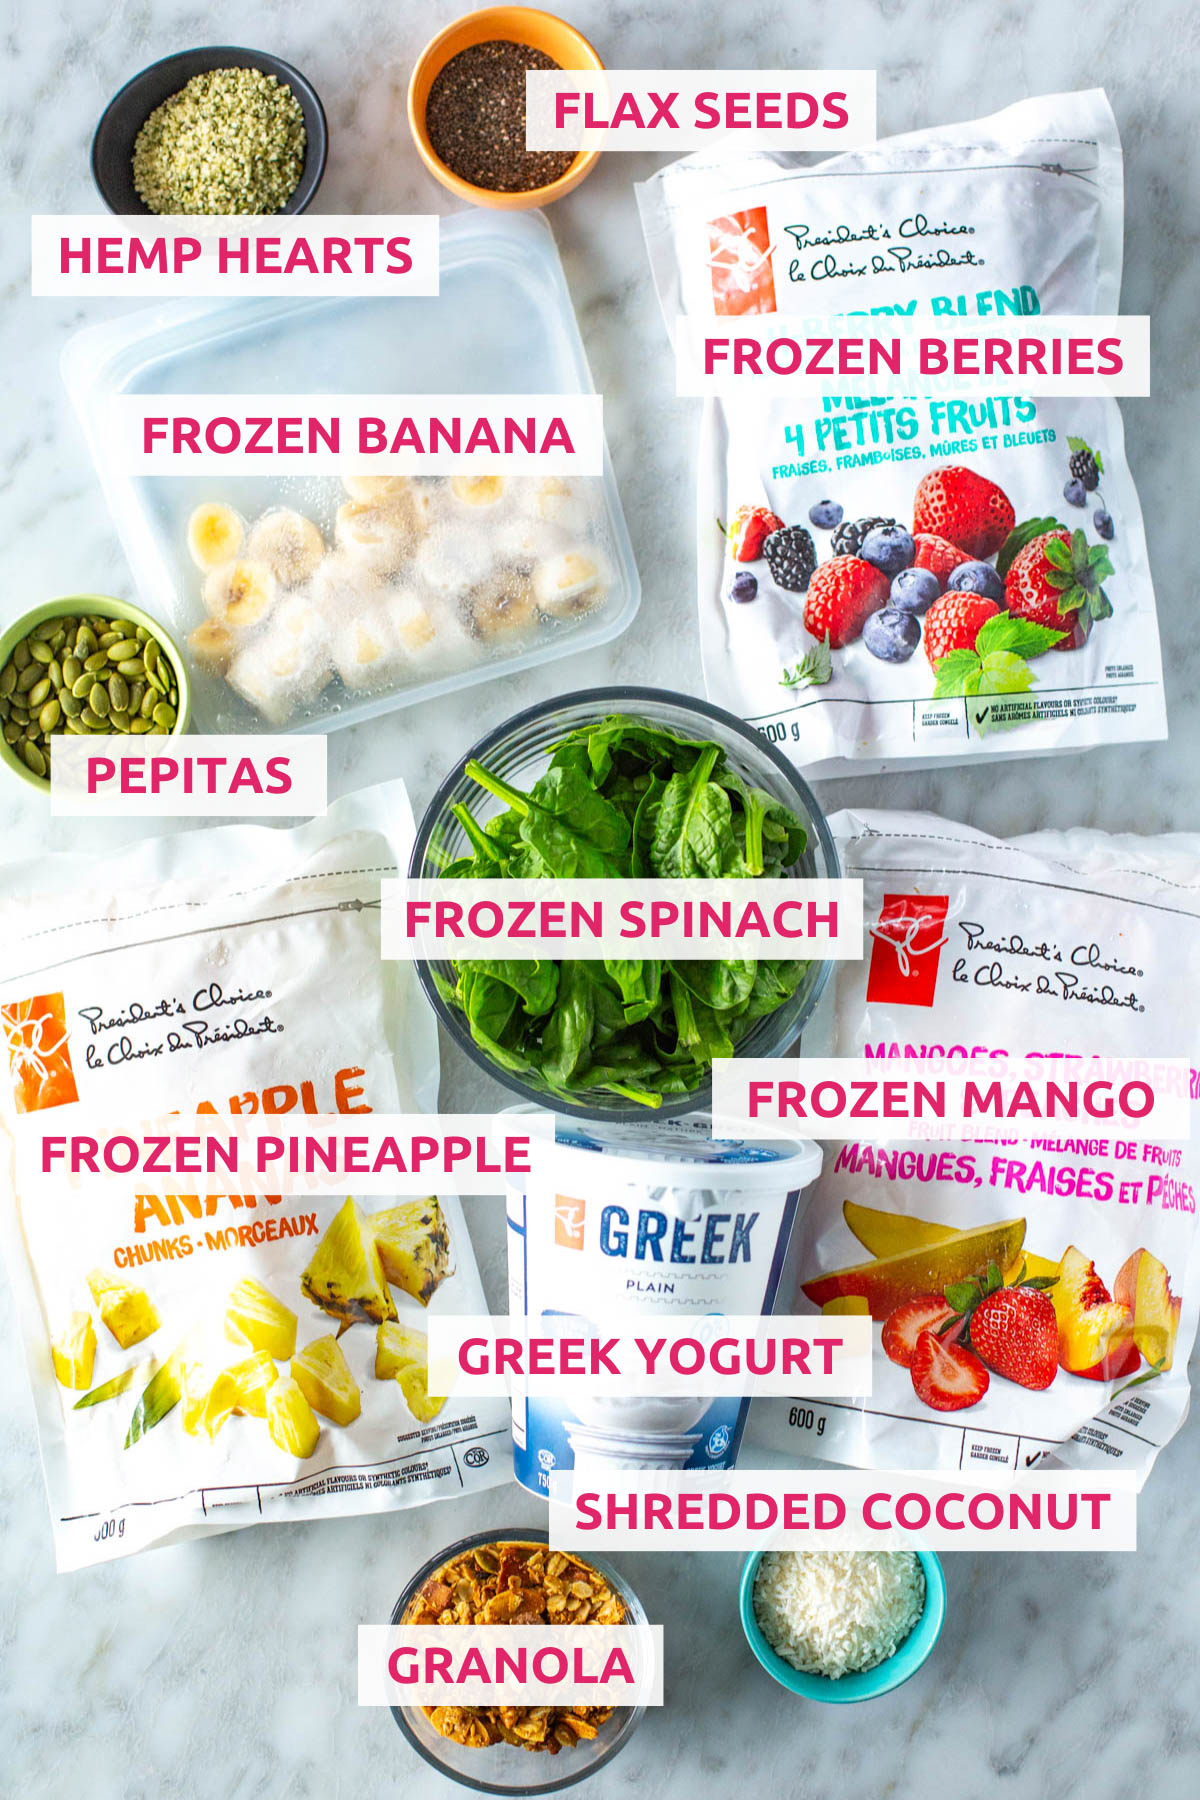 Ingredients for smoothie bowls: hemp hearts, frozen bananas, flax seeds, frozen berries, pepitas, frozen berries, frozen pineapple, Greek yogurt, frozen mango, shredded coconut, and granola.